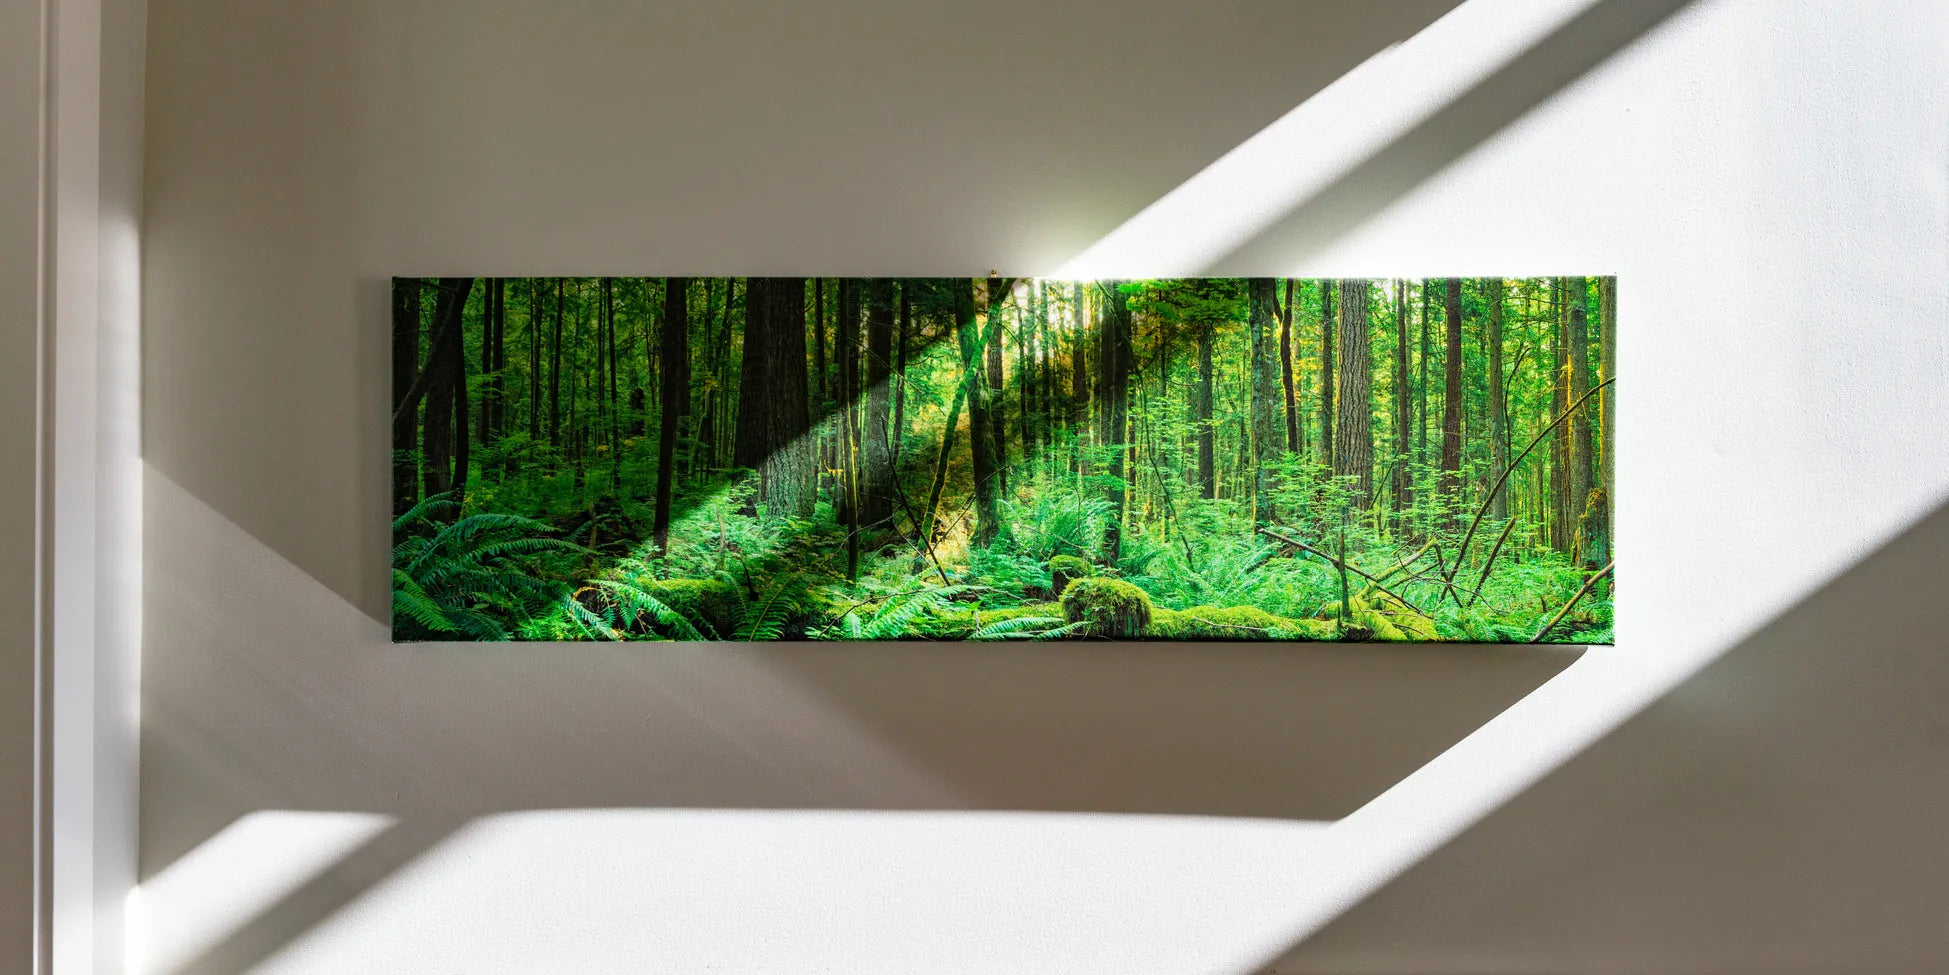 Preserving Your Canvas Prints: How to Protect Against Sunlight Fading and Ensure Longevity